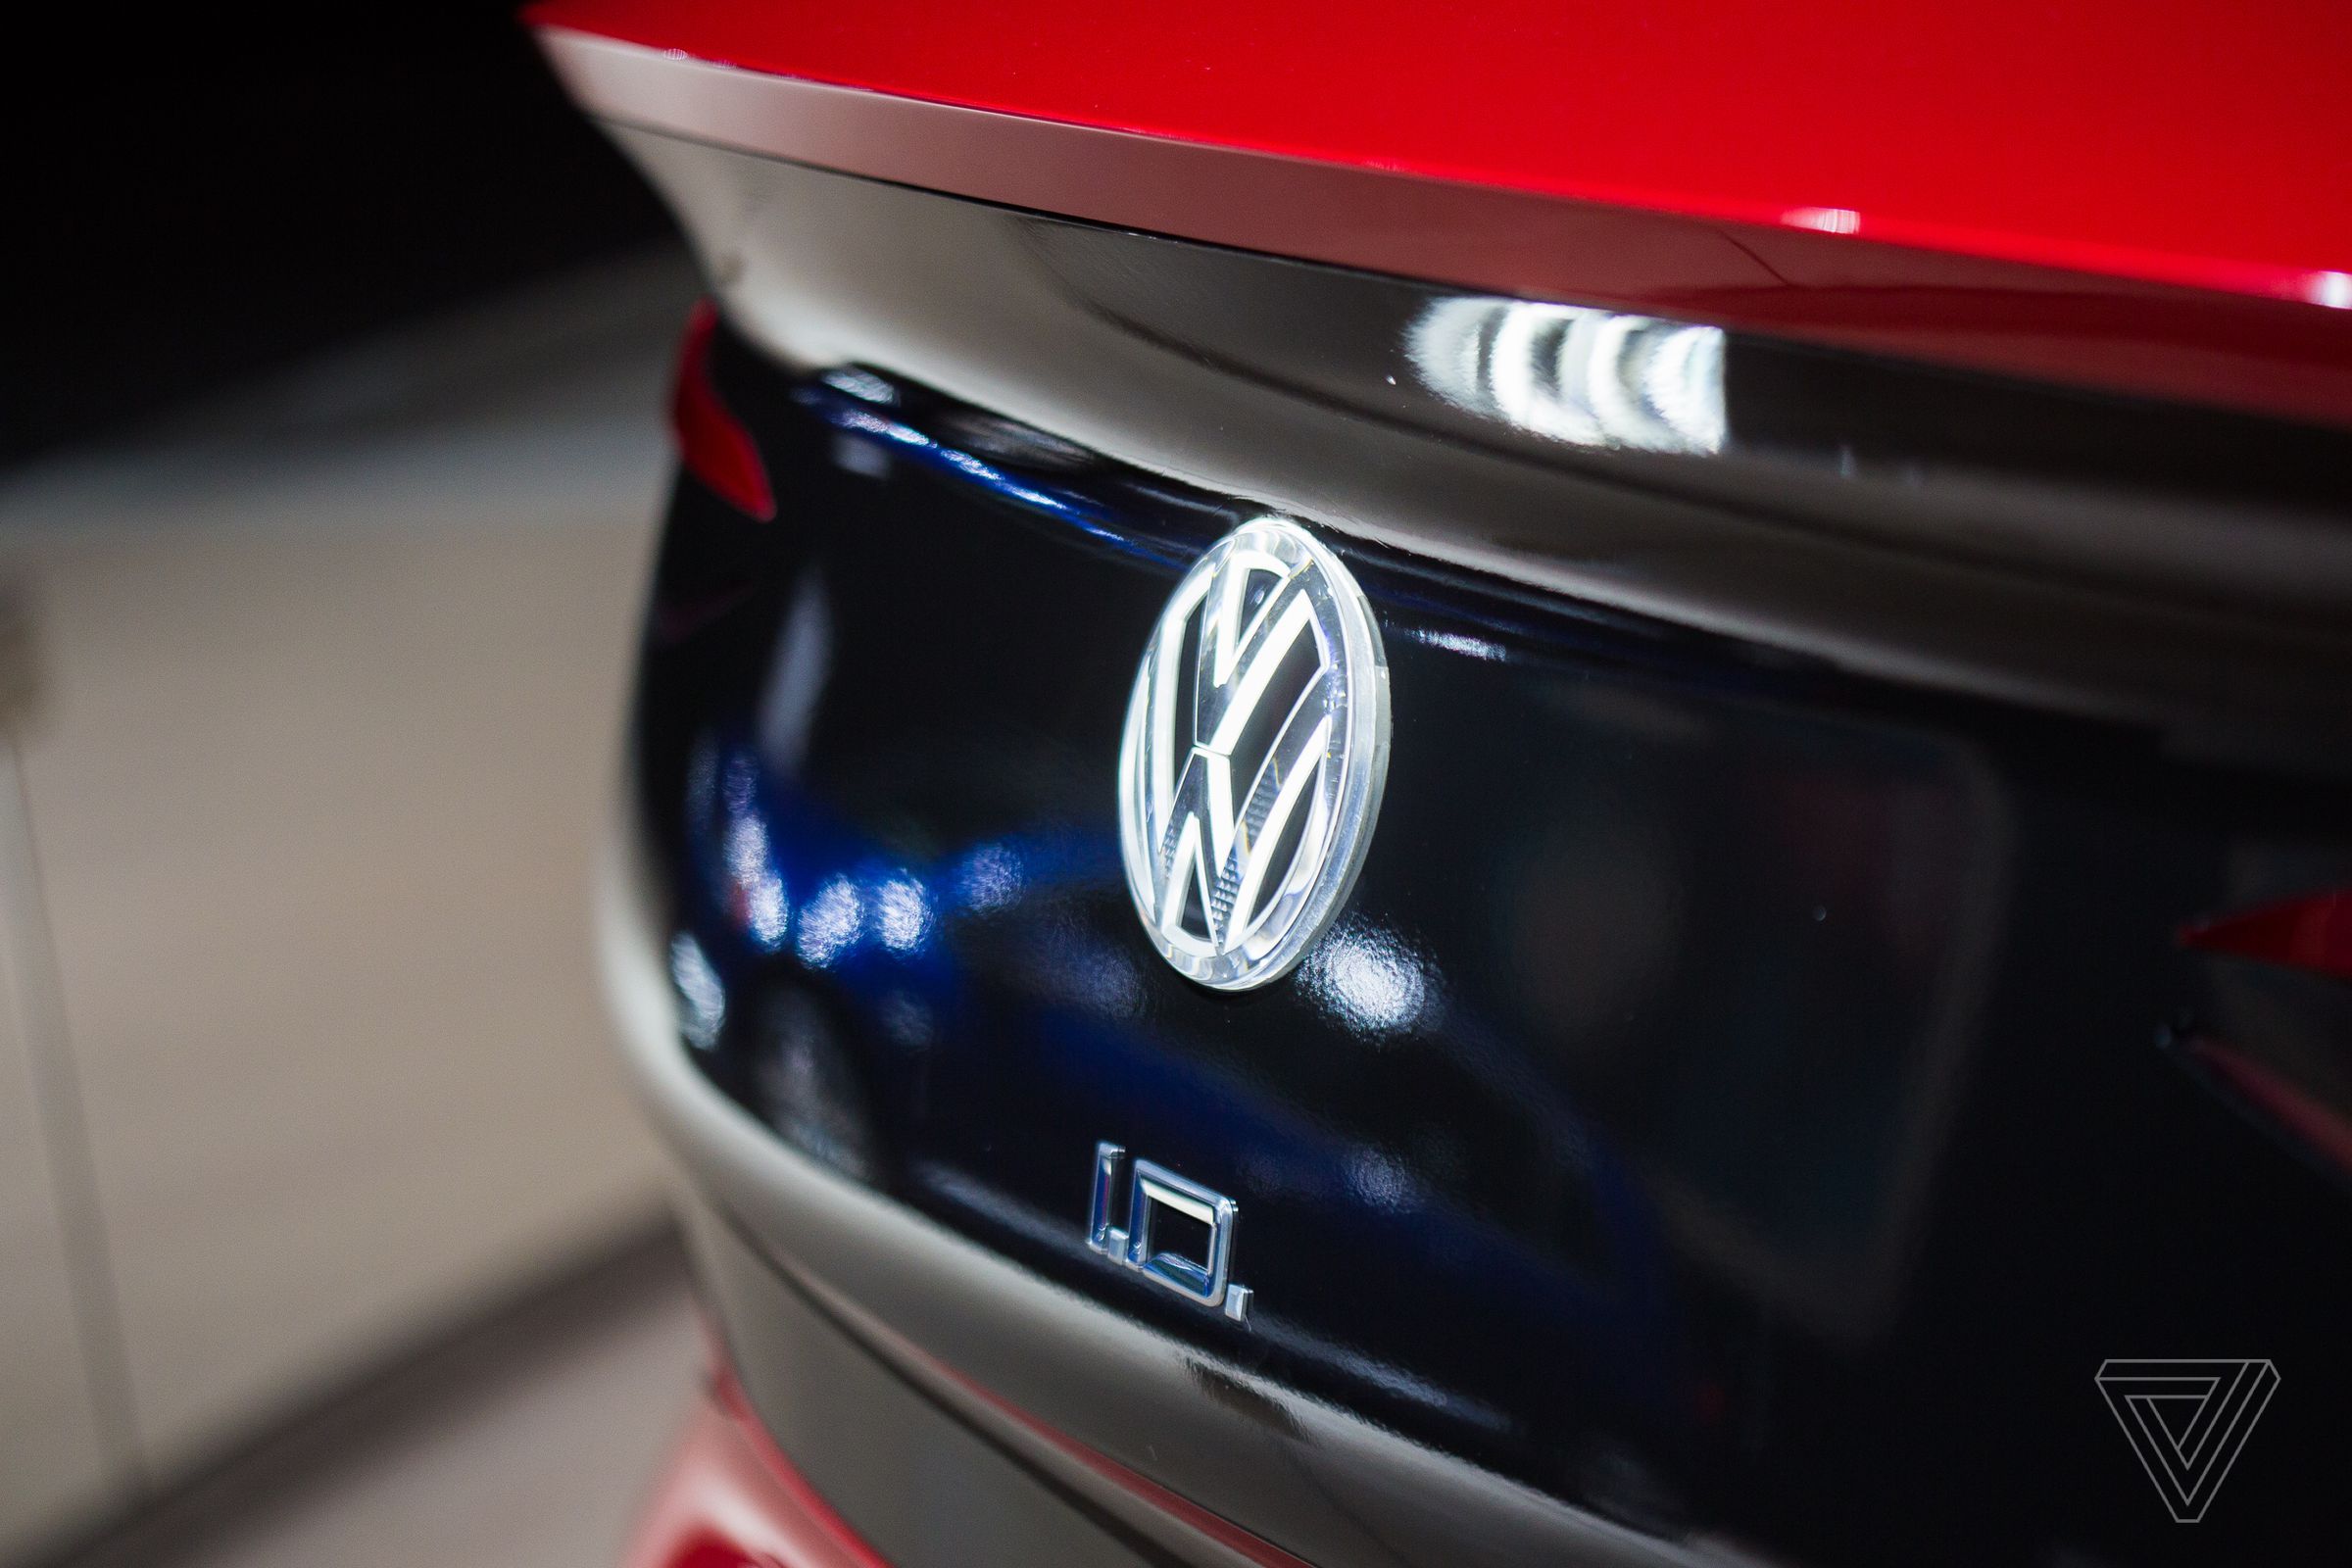 The I.D. Crozz’s rear badge glows in an effort to remind you that it’s electric.